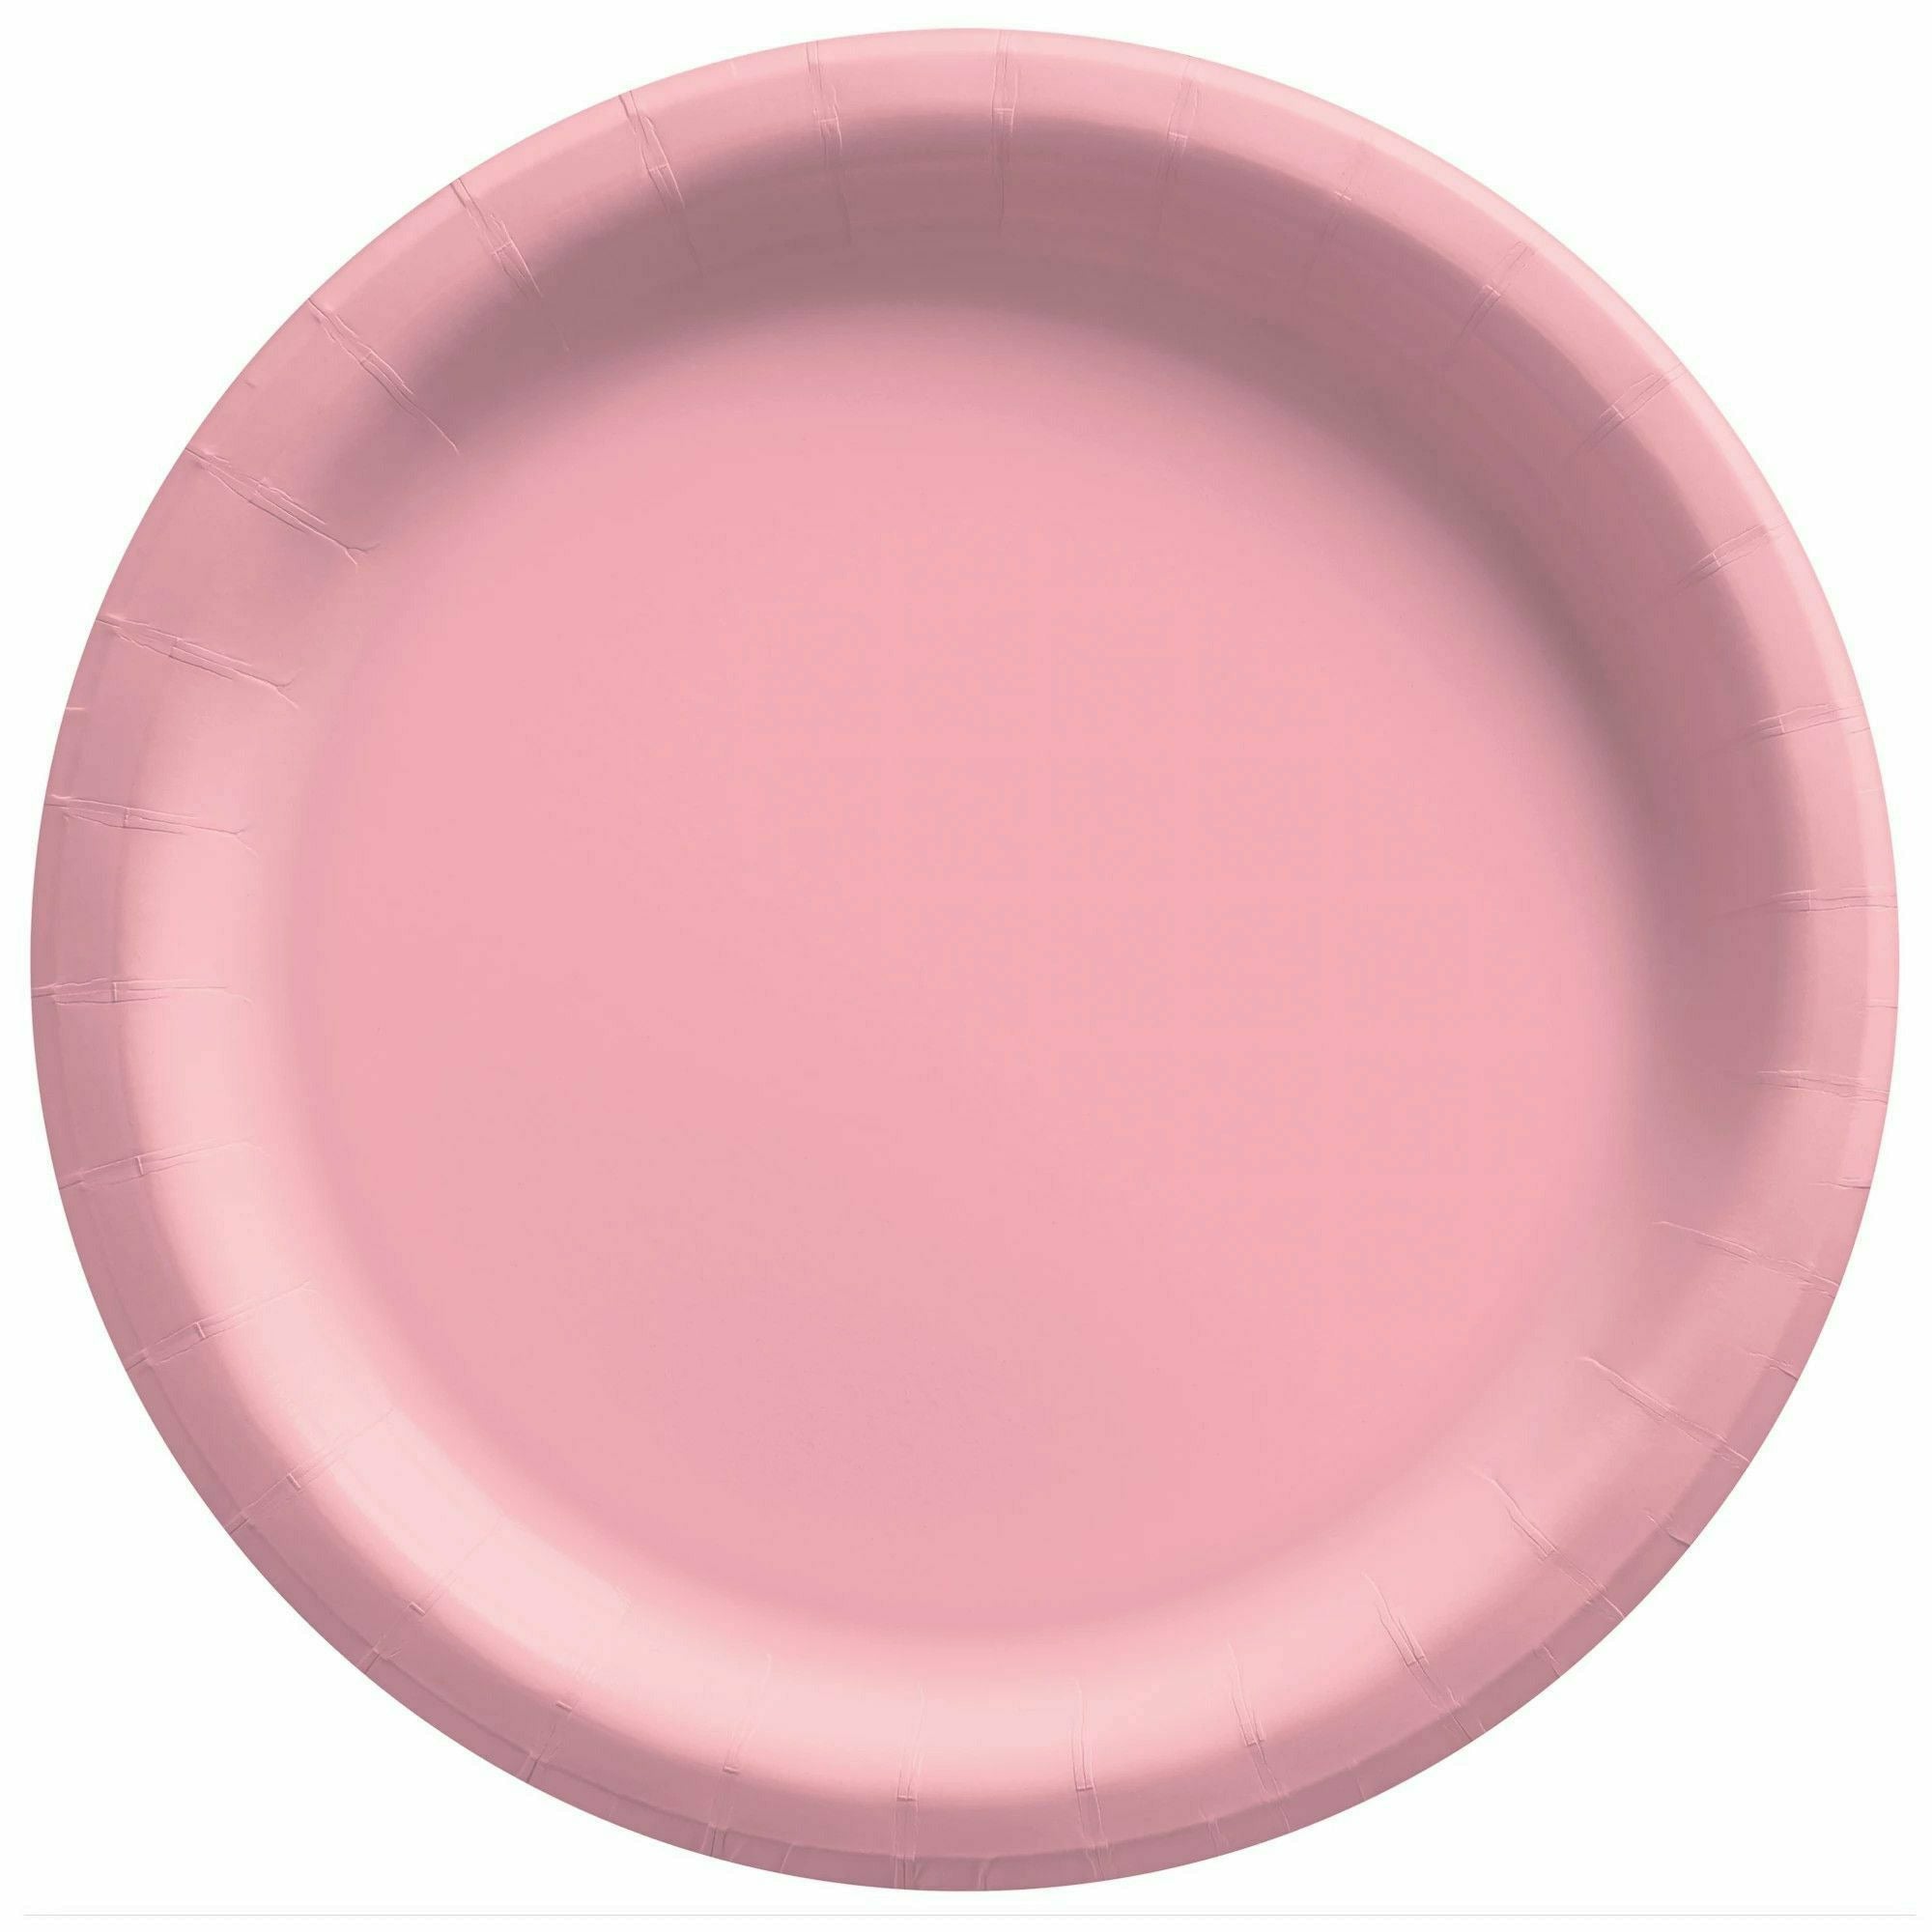 Amscan BASIC New Pink - 8 1/2" Round Paper Plates, 20 Ct.